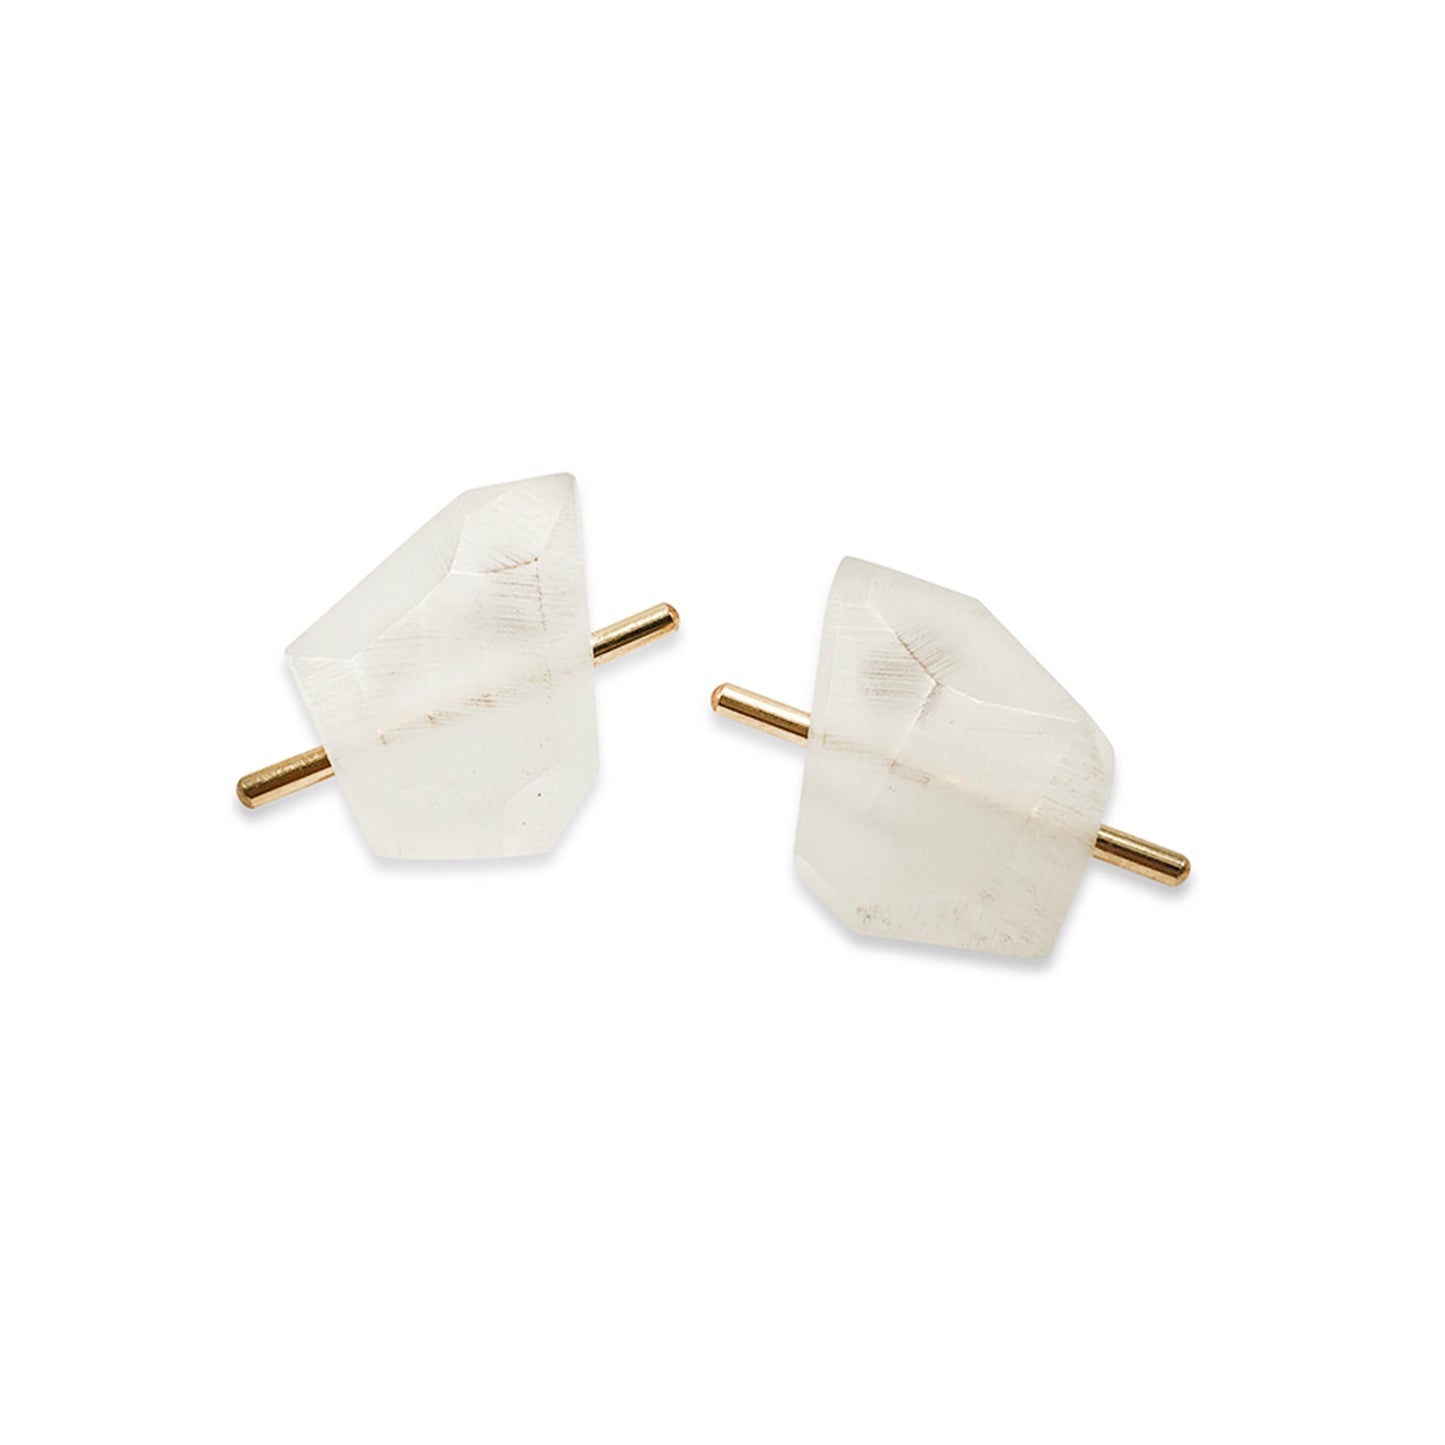 Load image into Gallery viewer, White acrylic rock stud earrings on white background.
